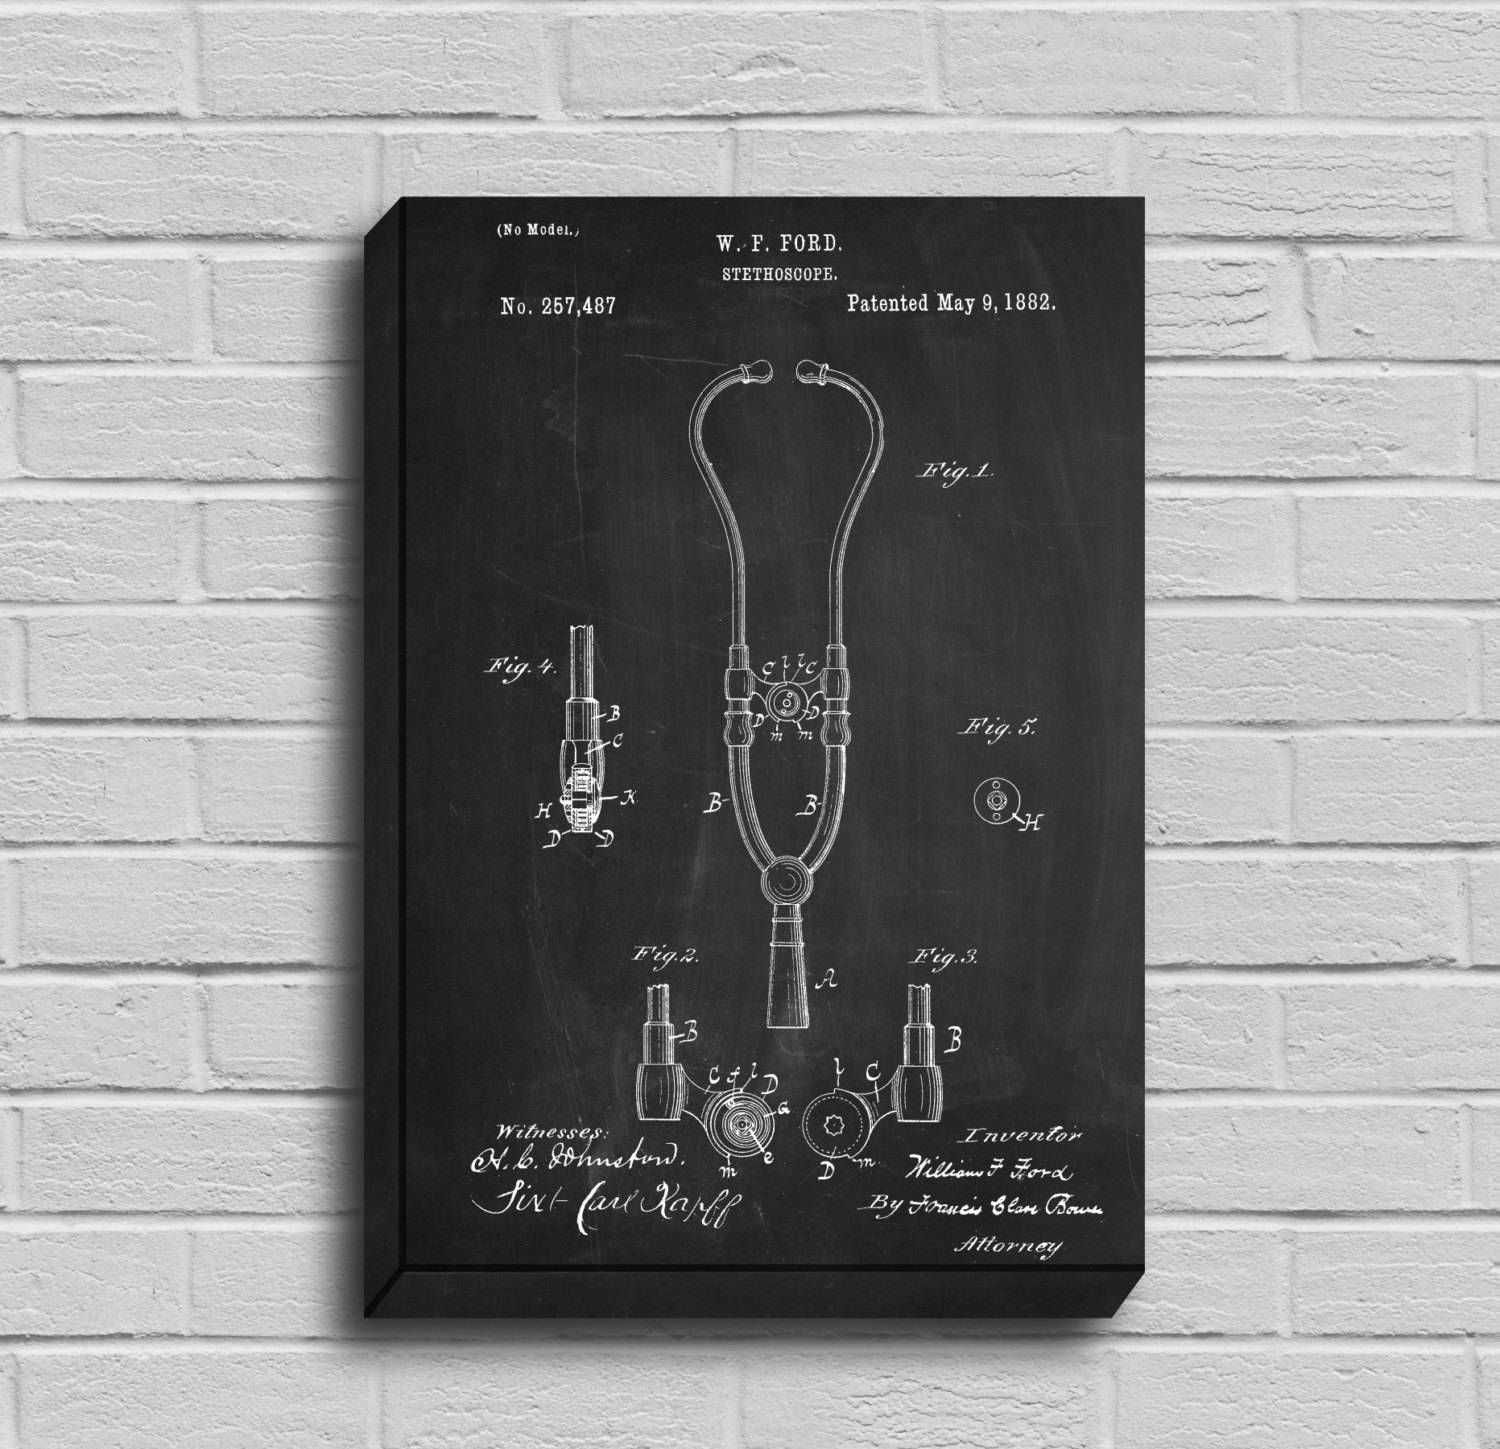 Canvas – Vintage Stethoscope Poster, Stethoscope Patent Intended For Most Recent Medical Wall Art (View 4 of 20)